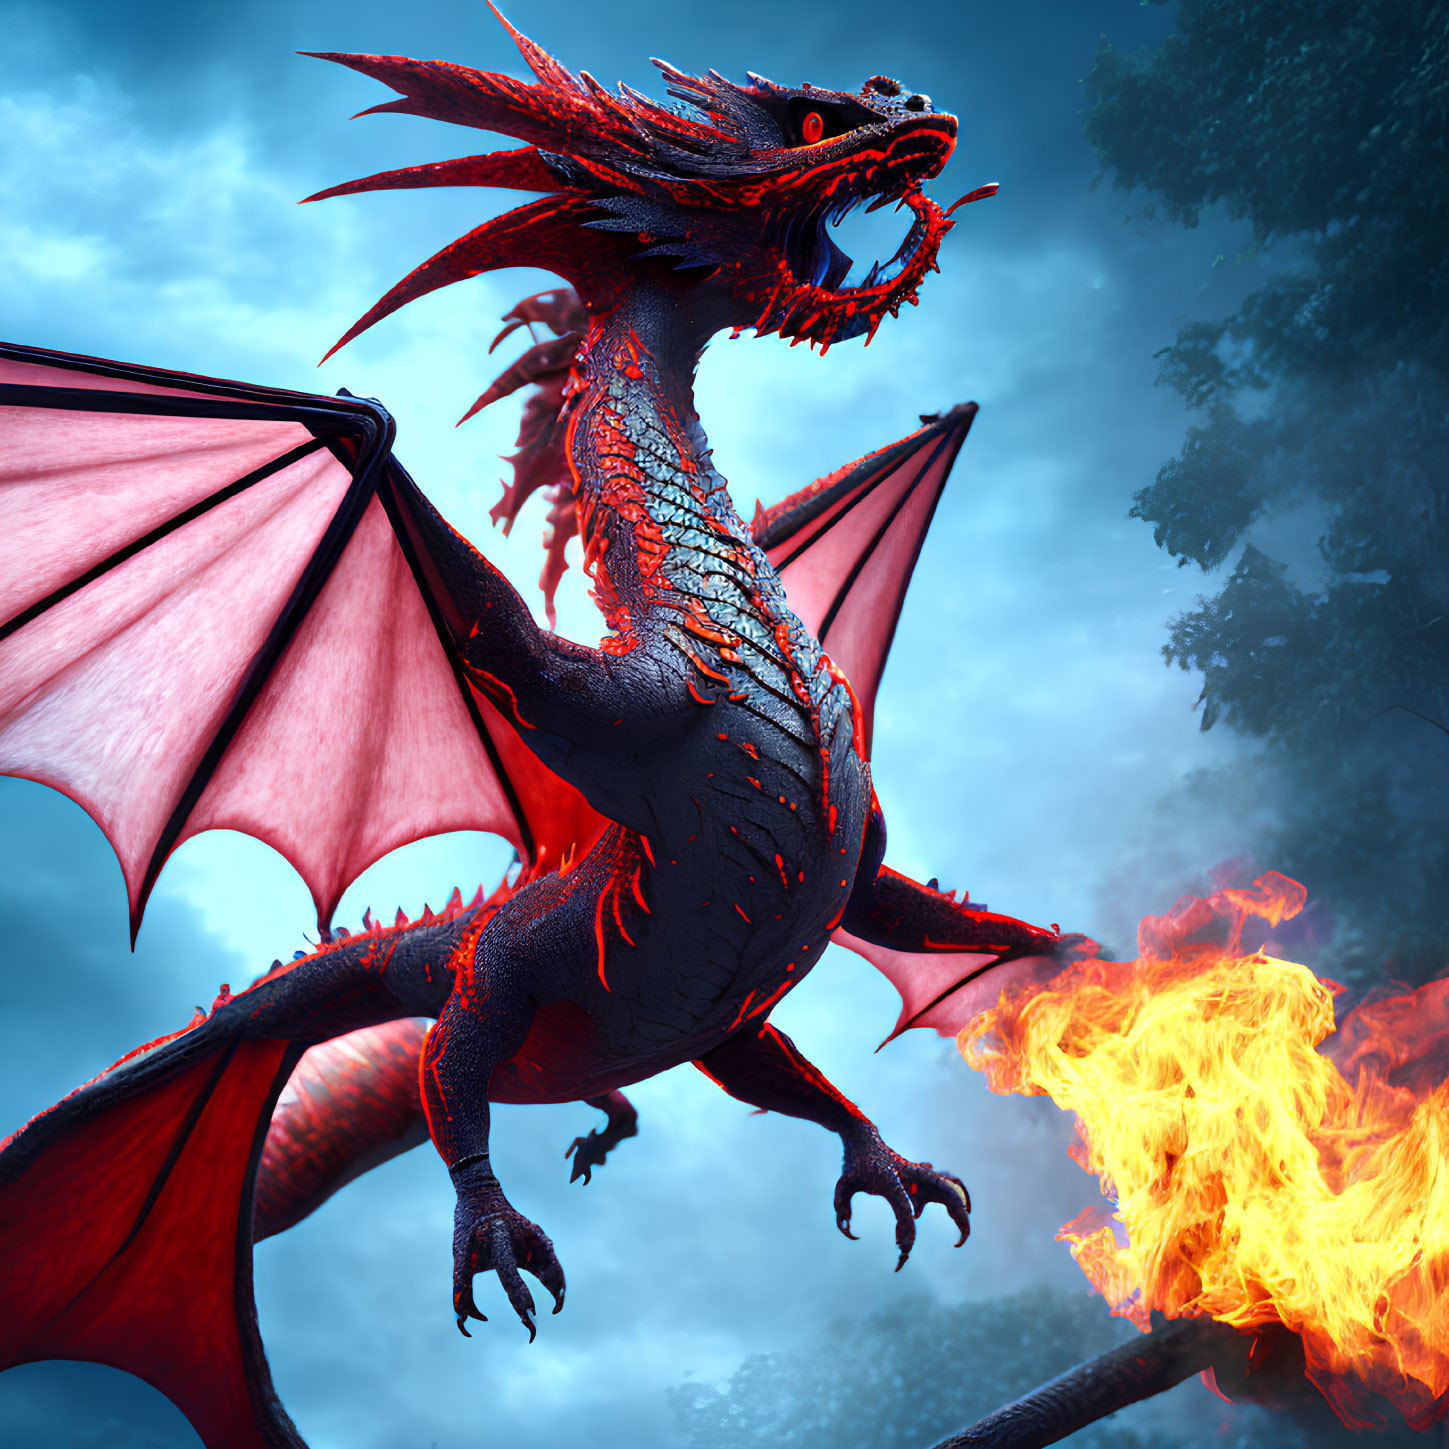 Red Dragon Breathing Fire on Blue Background